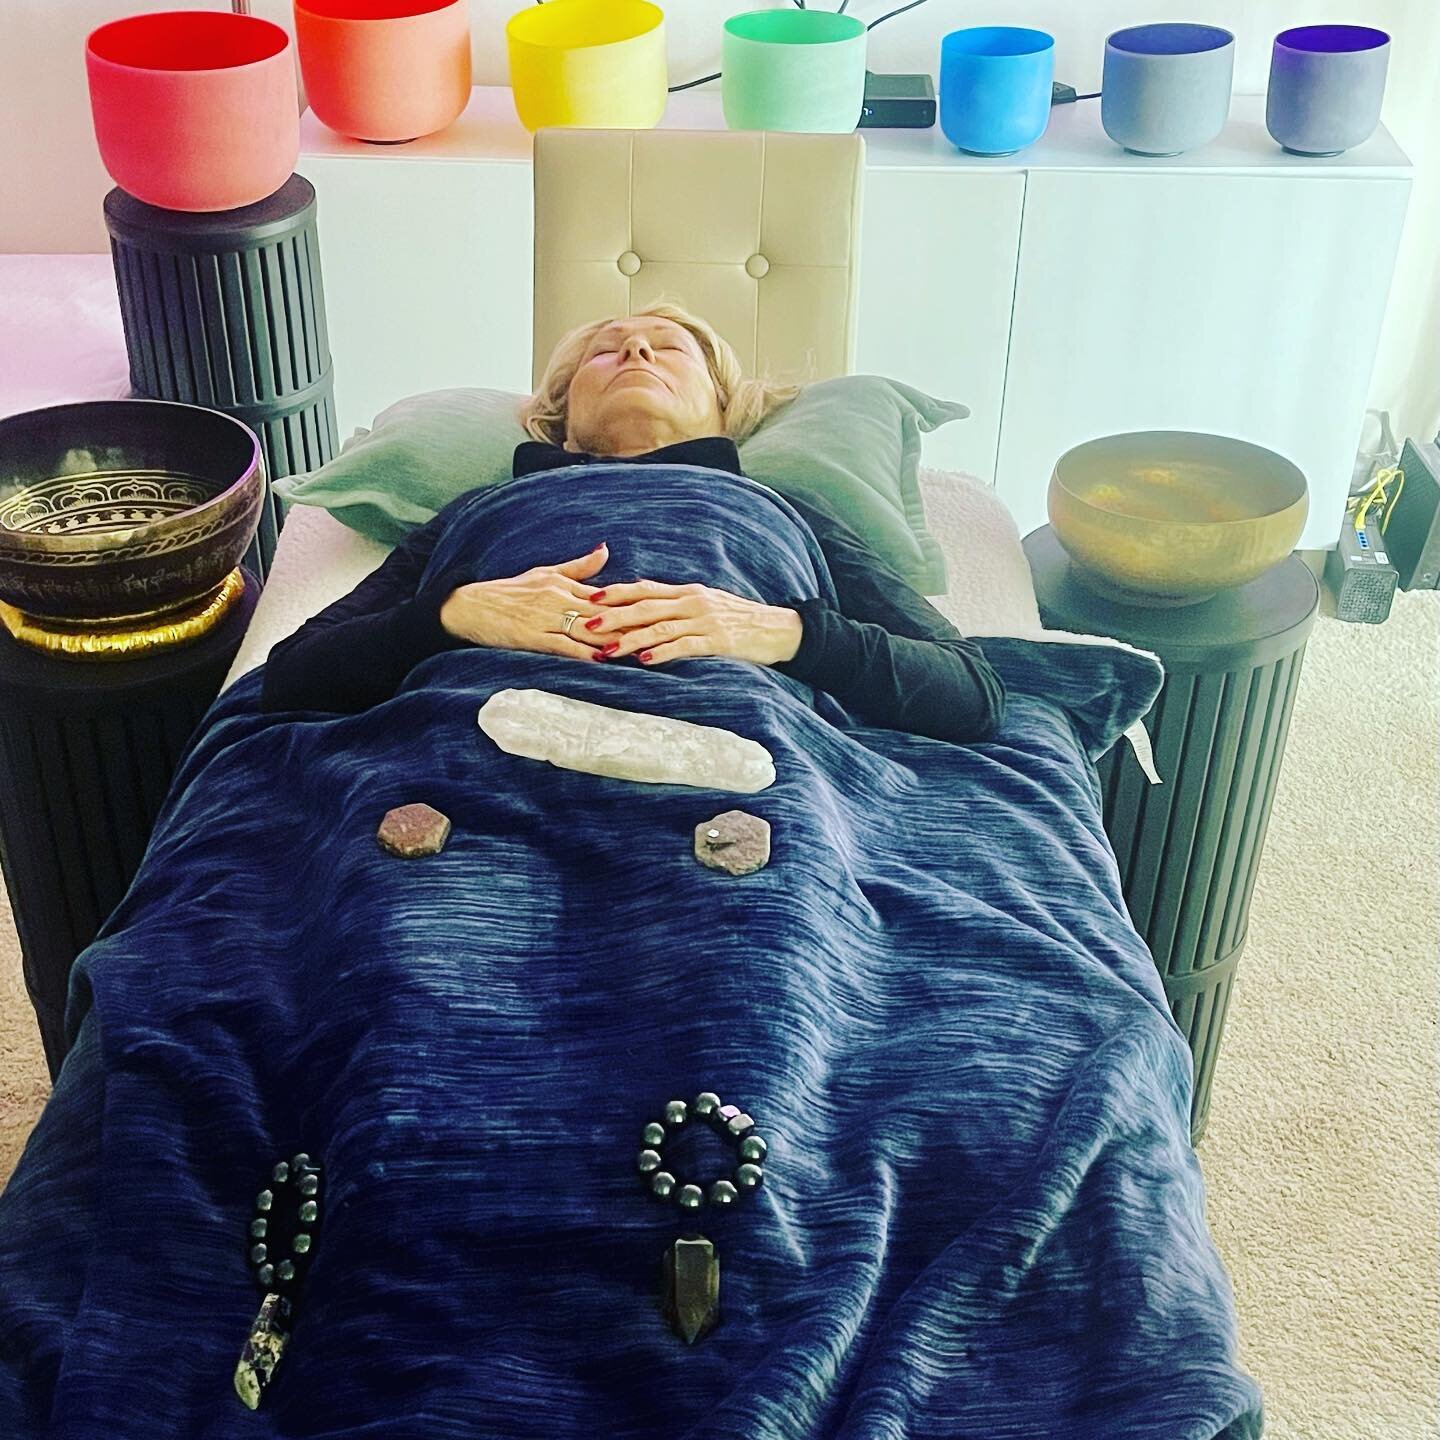 Saturdays are my days to be with clients and do Crystal Reiki Sound sessions. ( Thanks Shannon for allowing me to photo our session!). .
This kind of work, requires I be in my best health. As a practitioner I am a merely conduit but need to be a stro